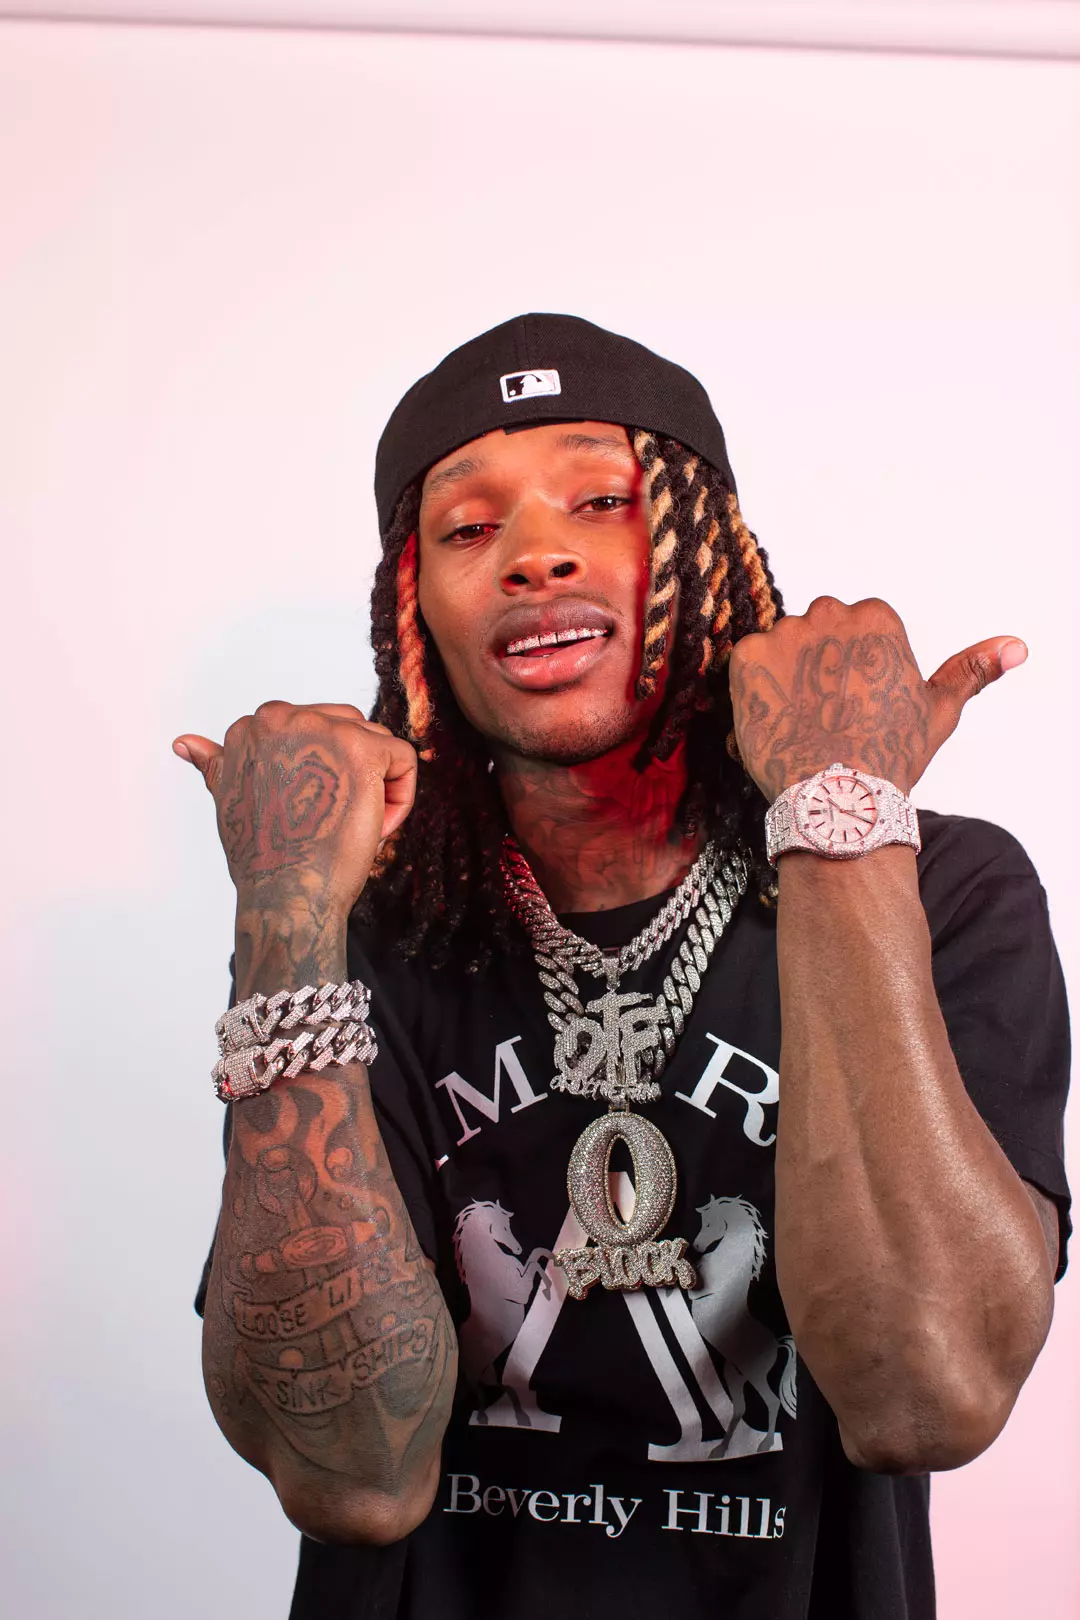 King Von reportedly passes away at age 26 - REMIXD Magazine